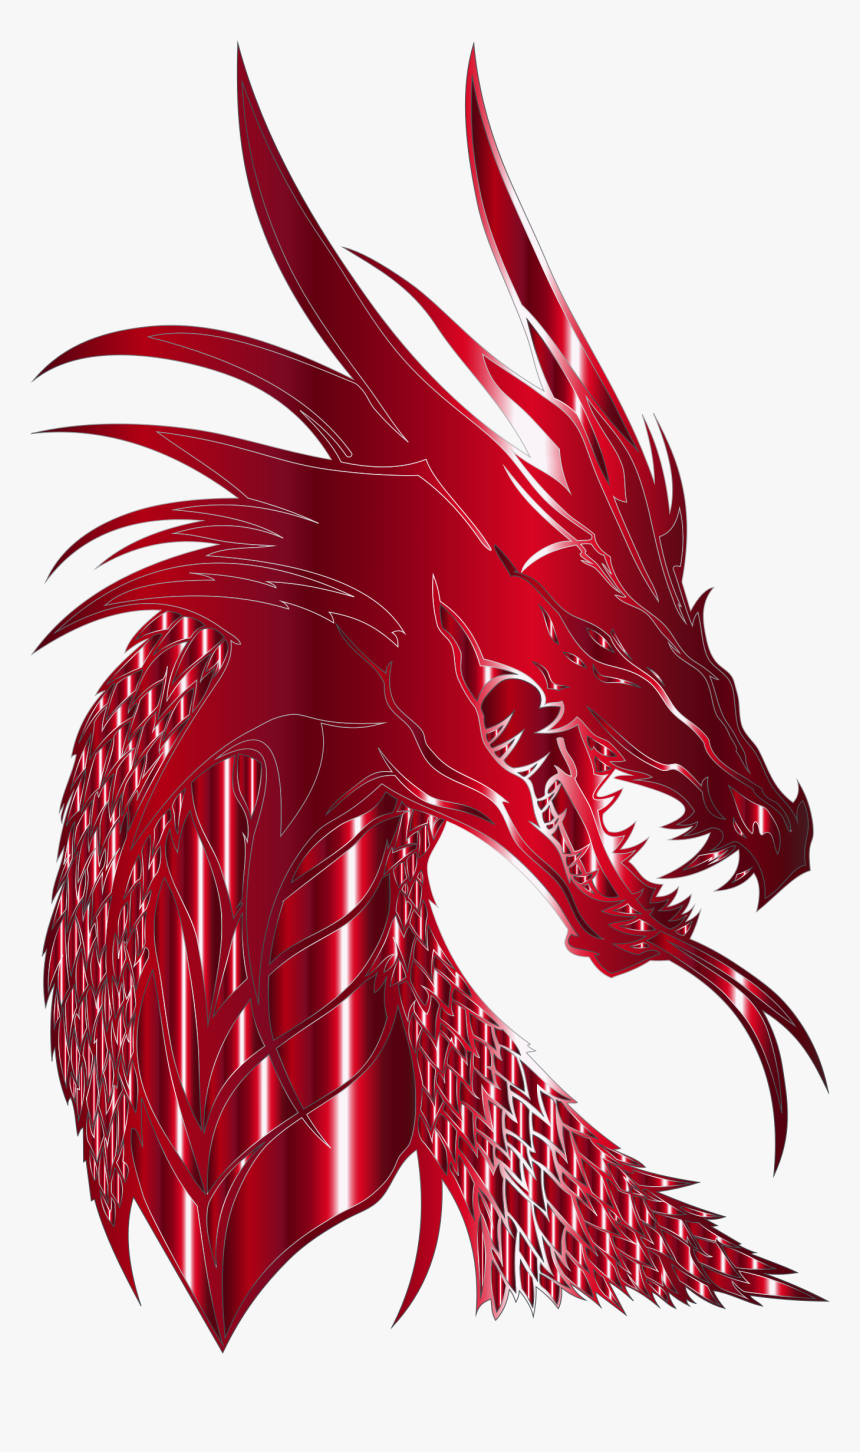 Transparent Cute Dragon Png - Dragon Head Silhouette, Png Download, Free Download